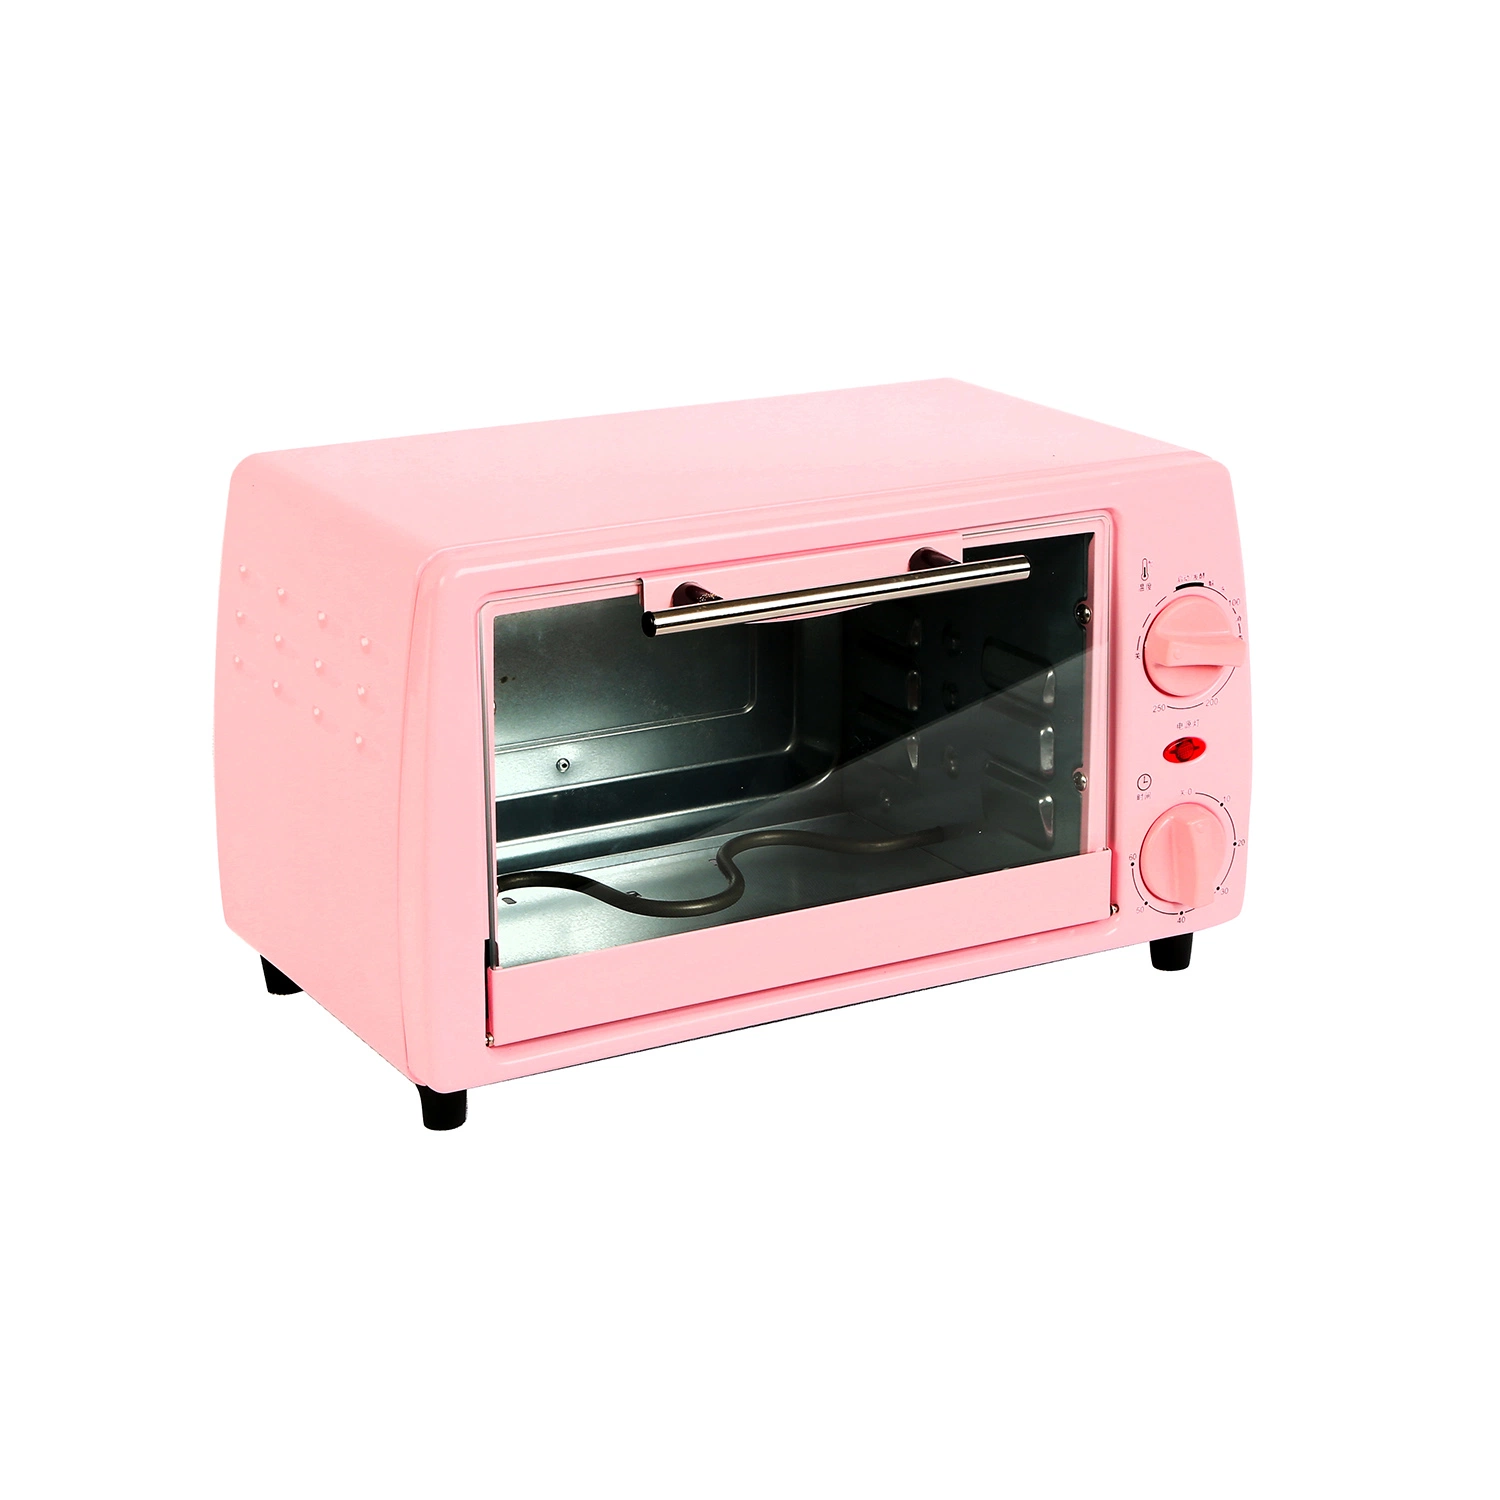 12L Pizza Baking Home Appliance Small Size Electric Toaster Oven